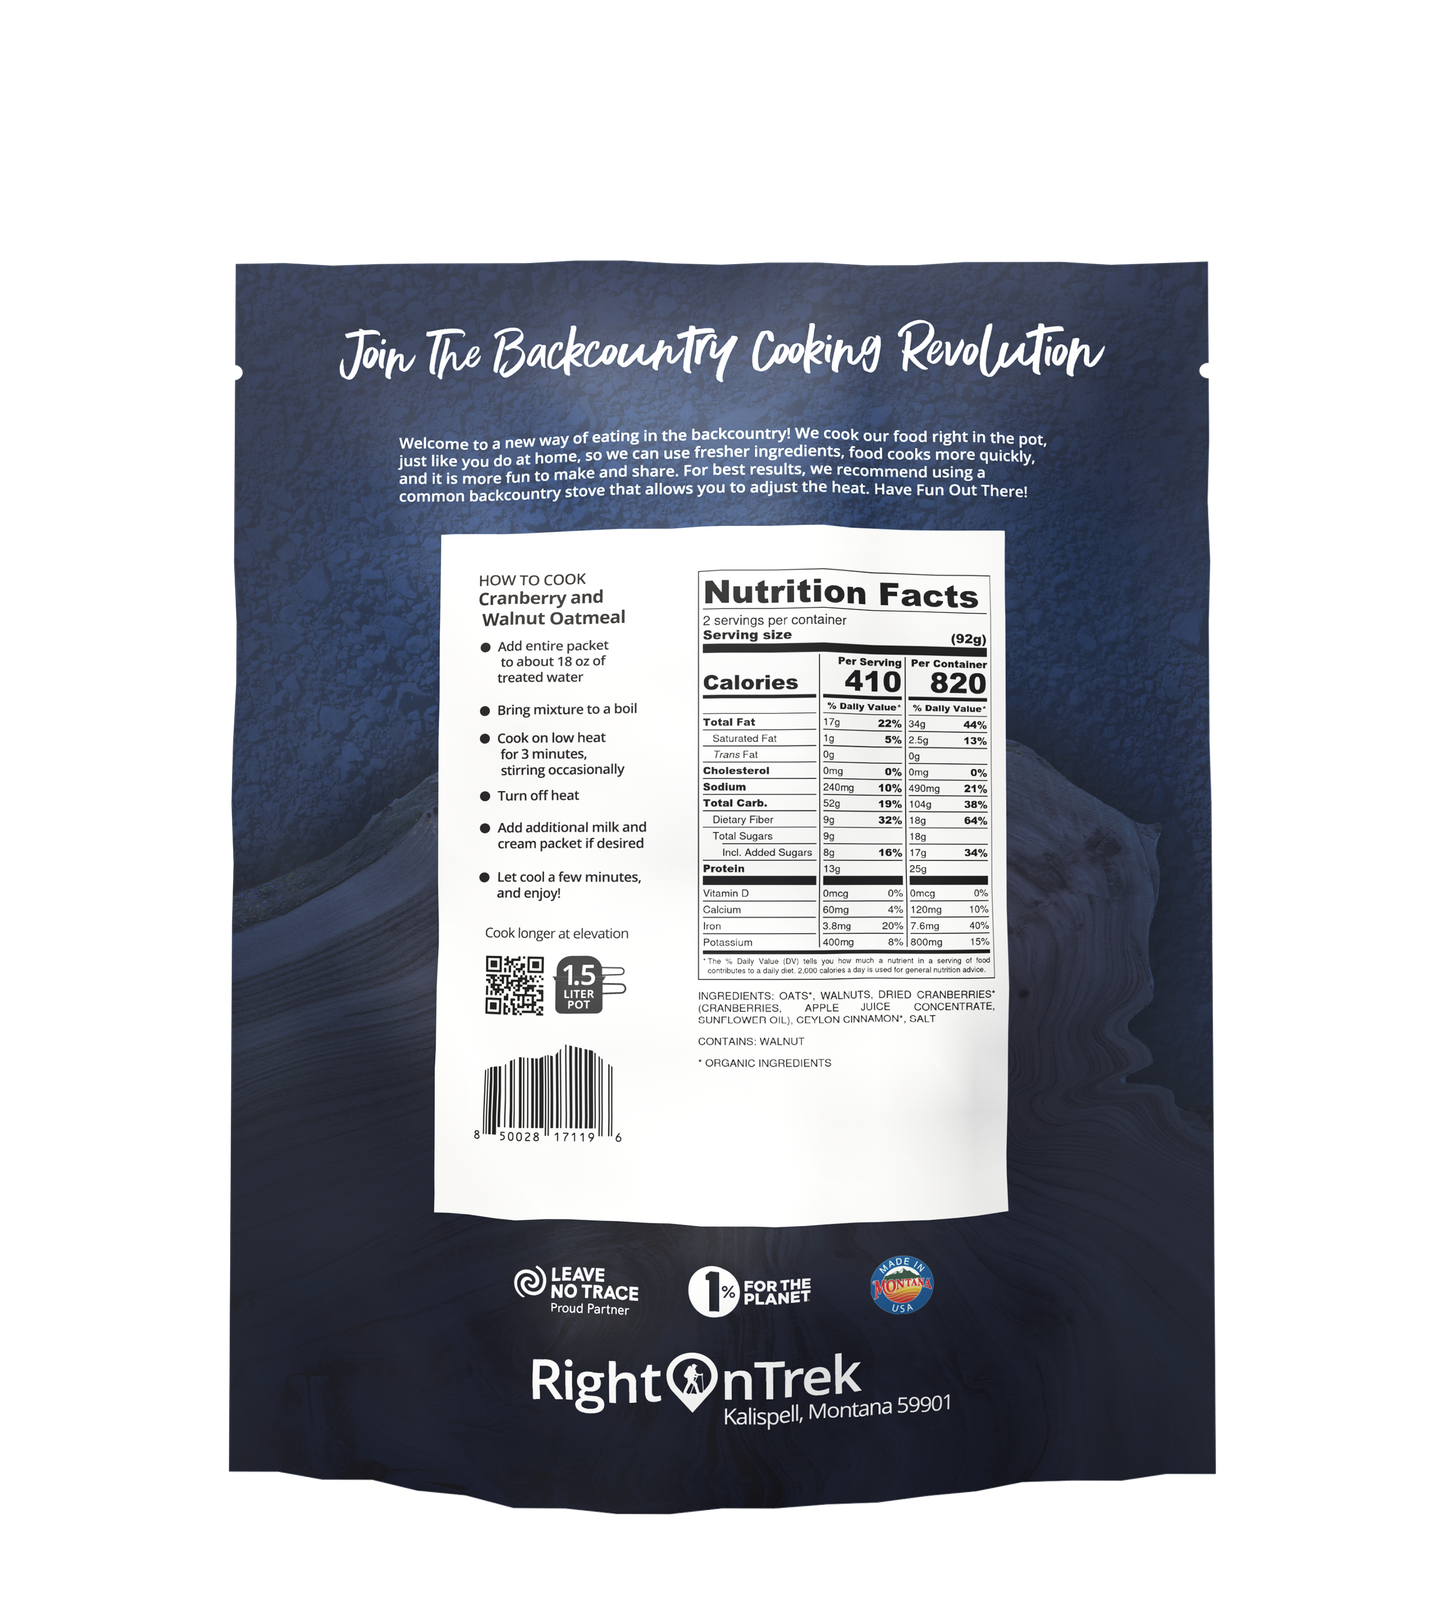 RightOnTrek cranberry and walnut oatmeal feeds 2 people nutrition table